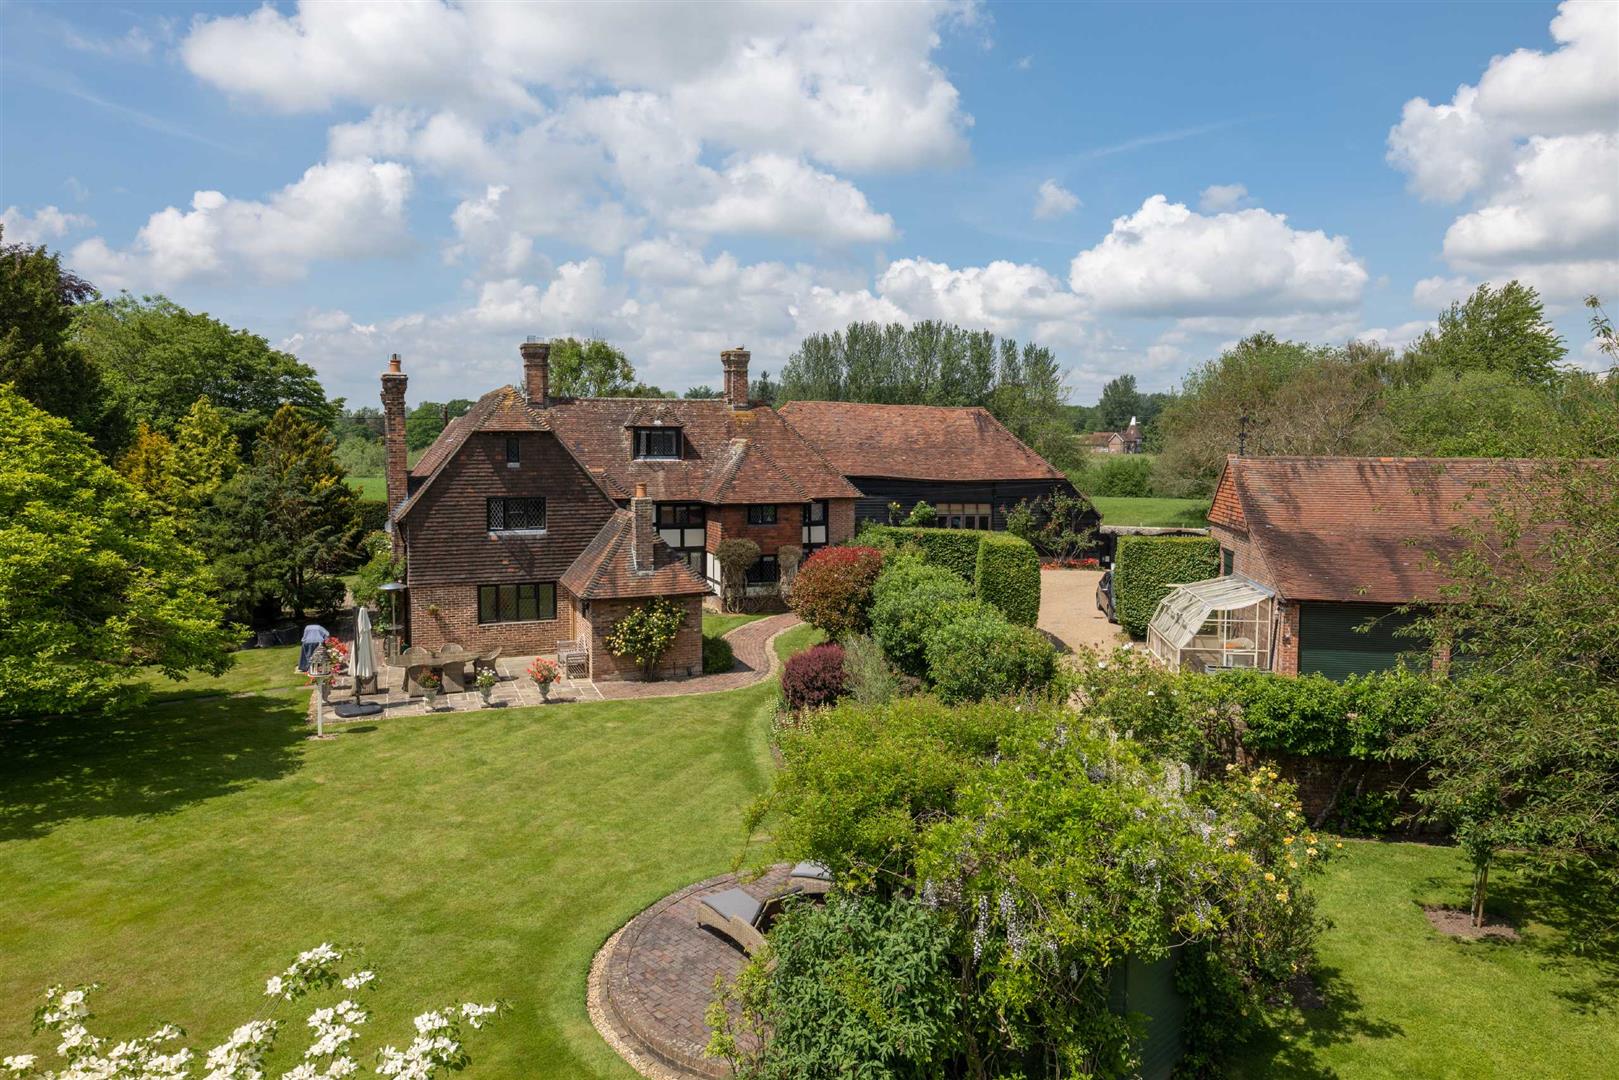 Property for sale in Piltdown, East Sussex - Offers in excess of £3,500,000